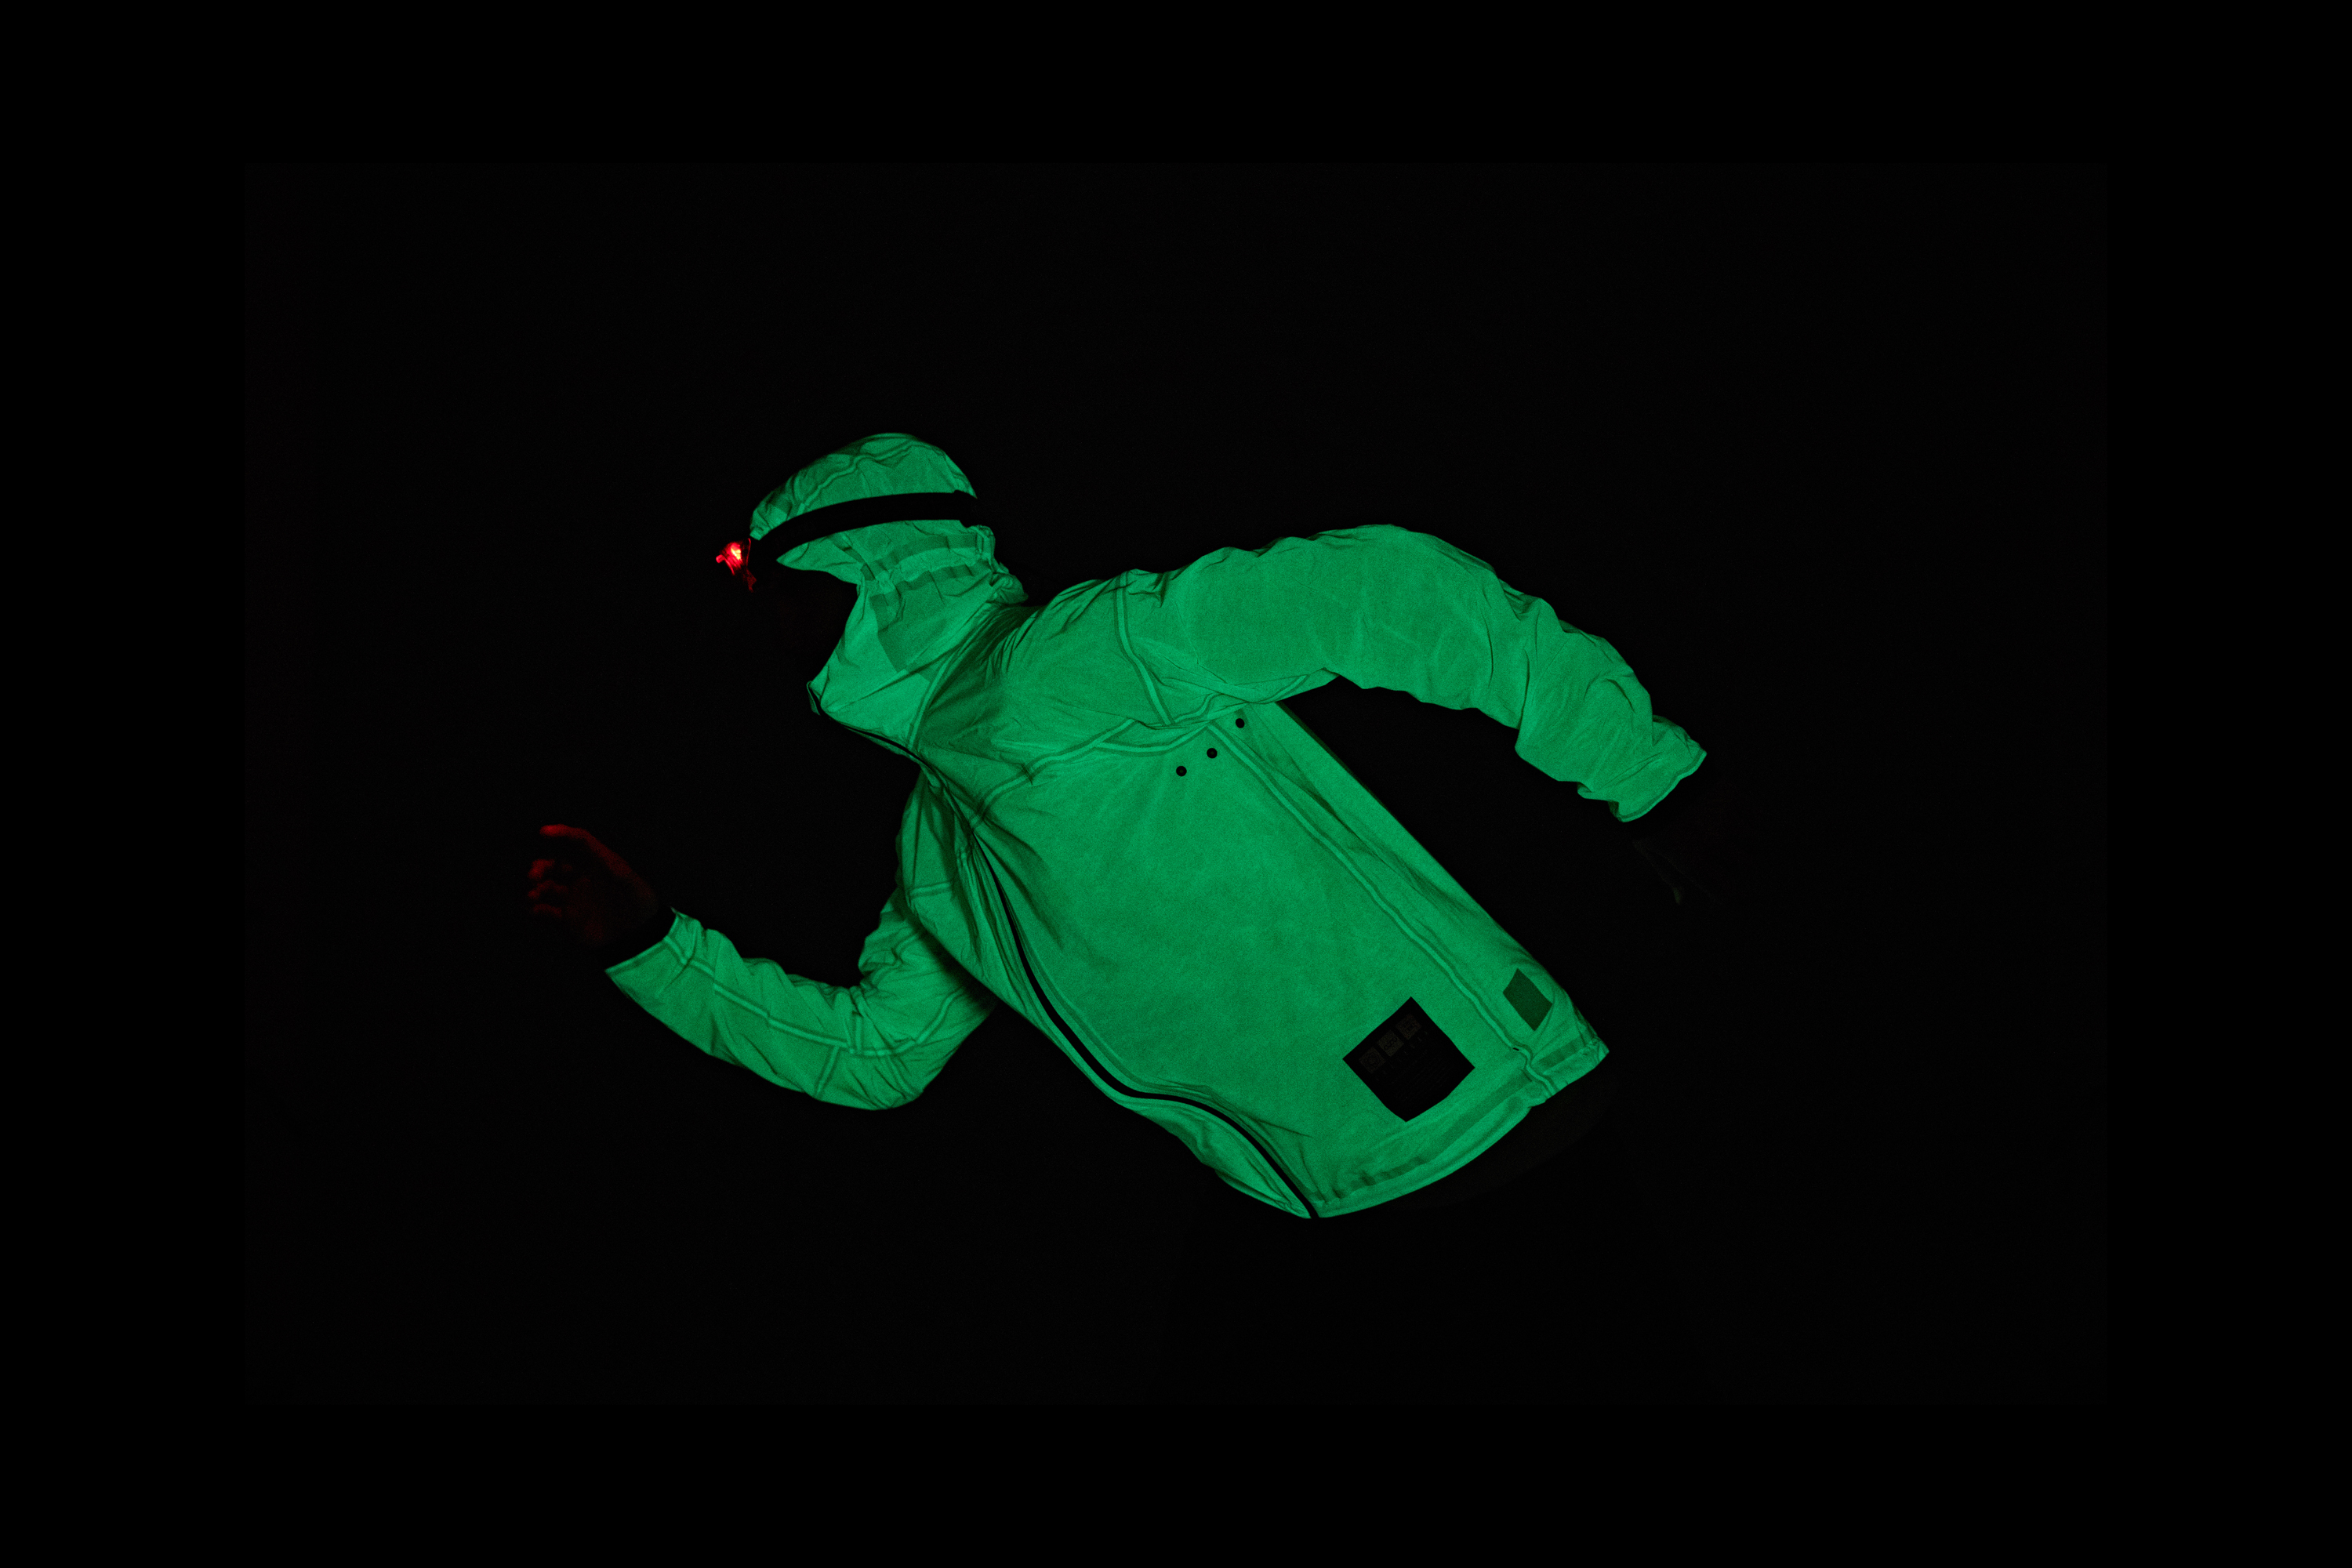 The Solar Charged Jacket from Vollebak (Sun Lee/Vollebak)